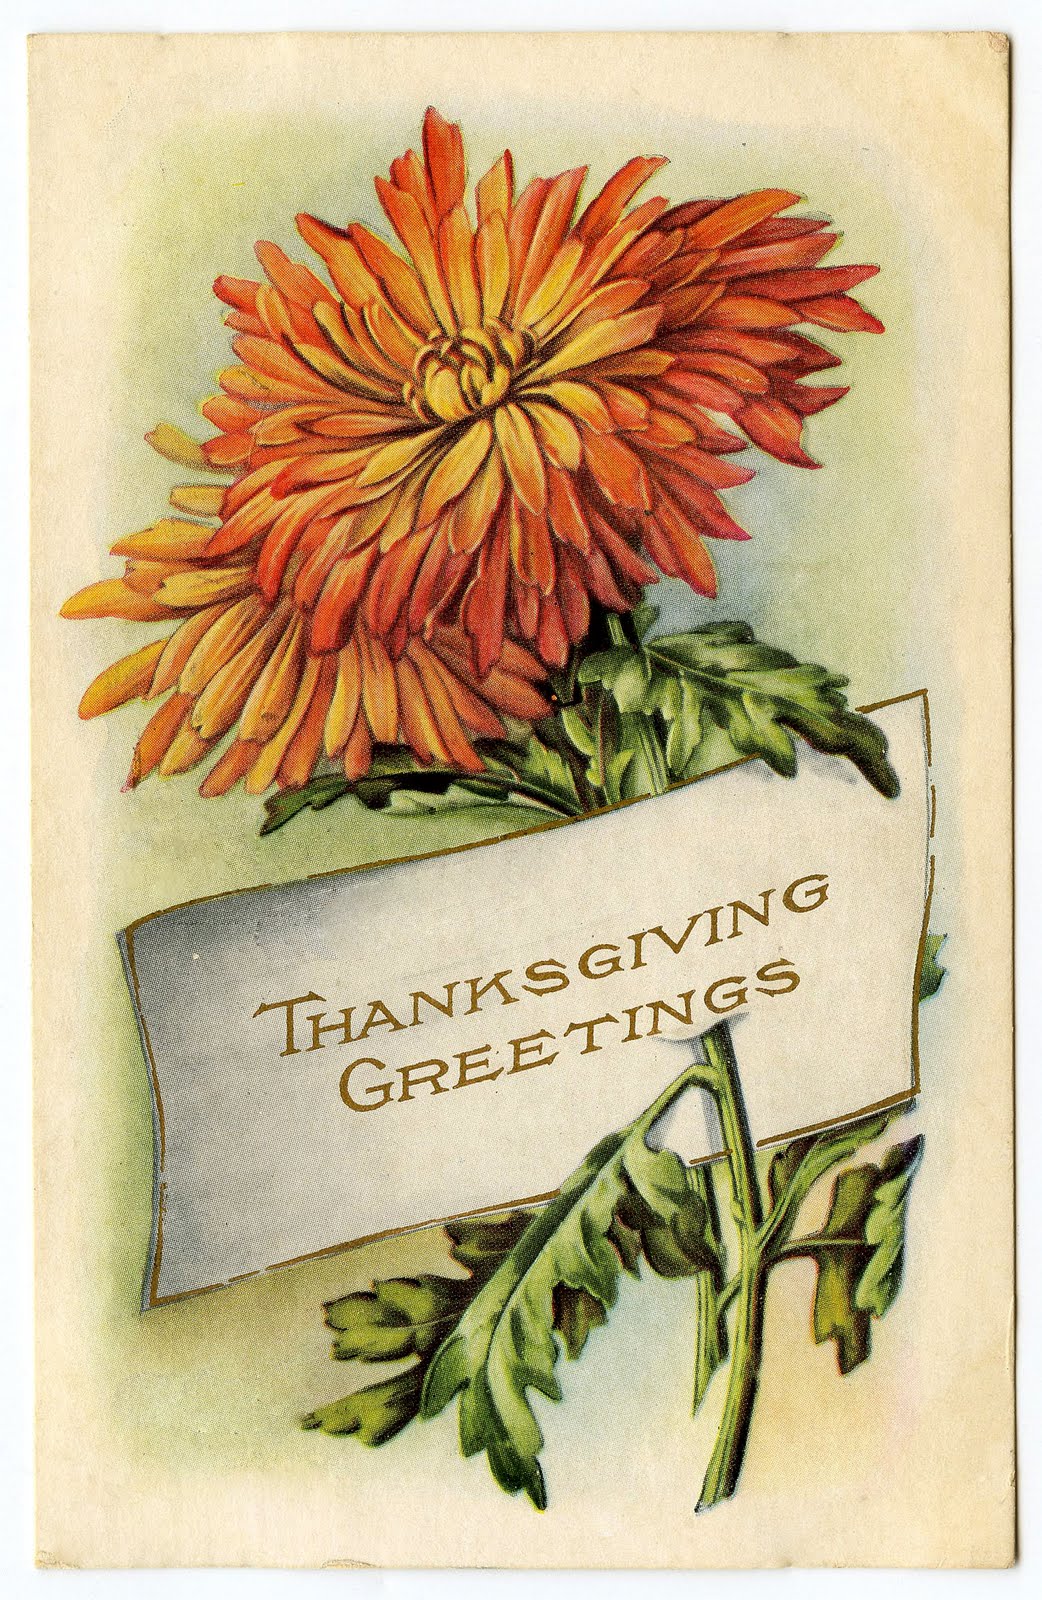 Vintage Thanksgiving Clip Art - Mums - Placecard - The ...